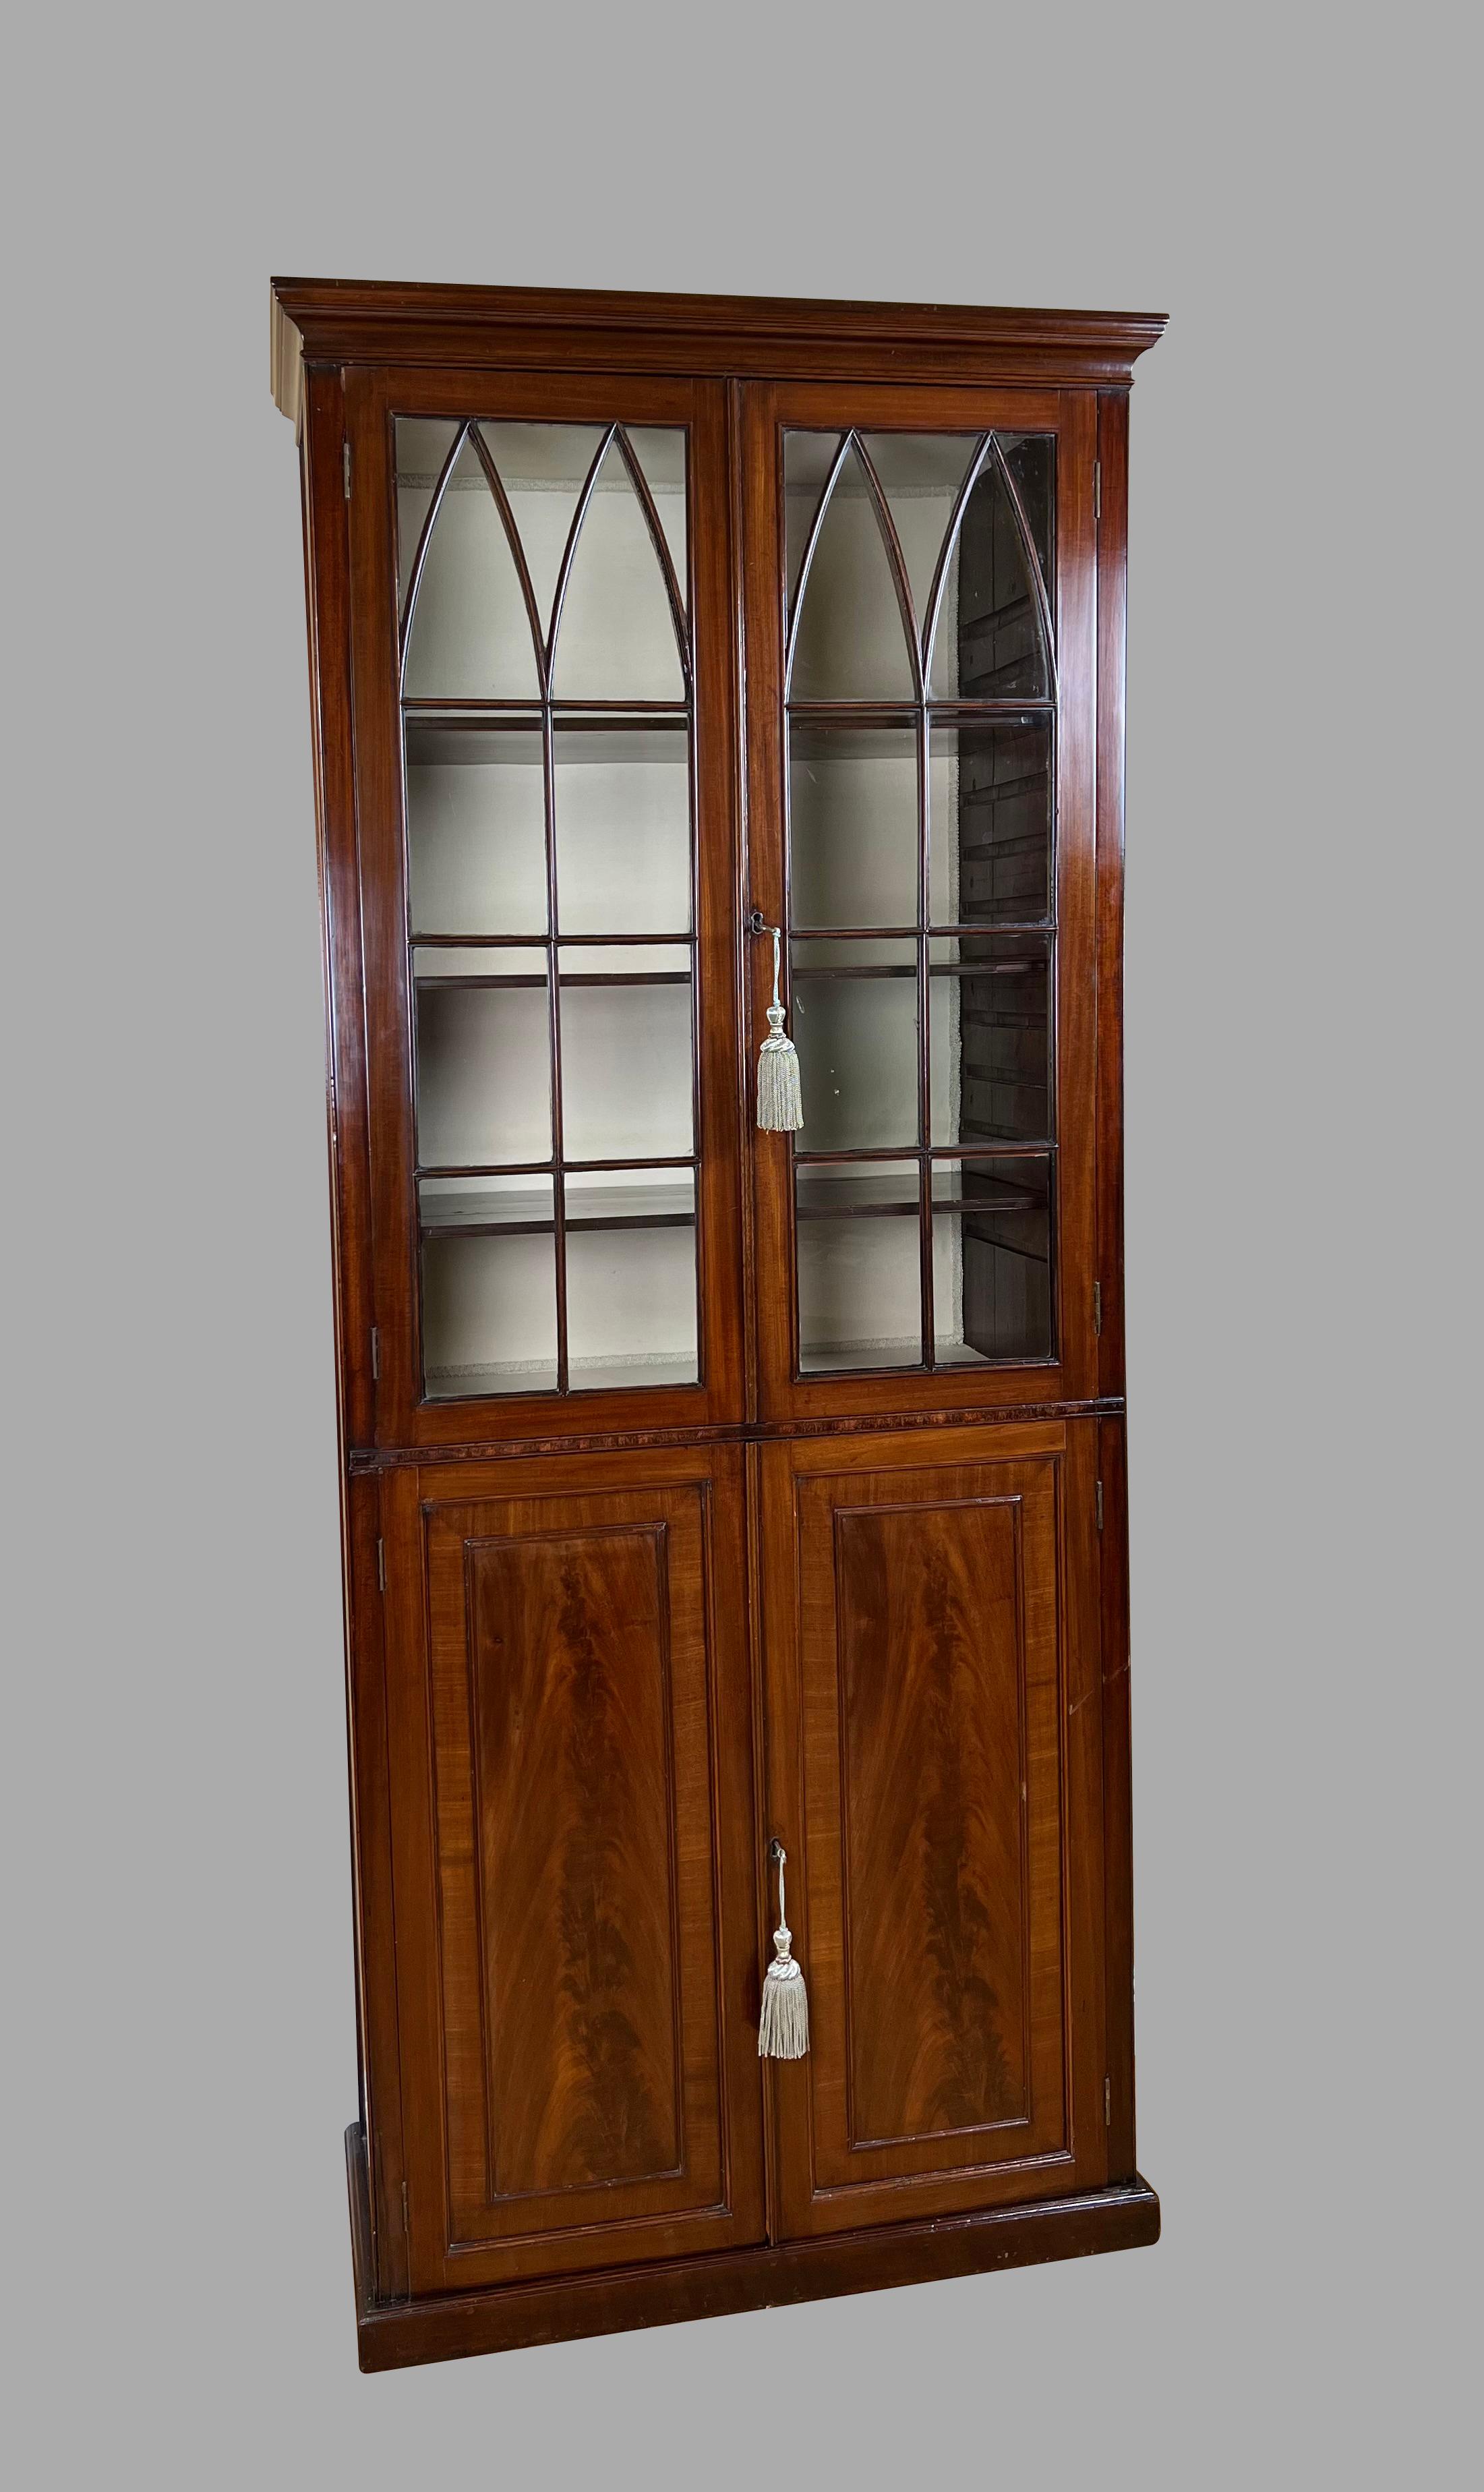 English Mahogany Late Georgian Period Bookcase with Glazed Doors For Sale 4